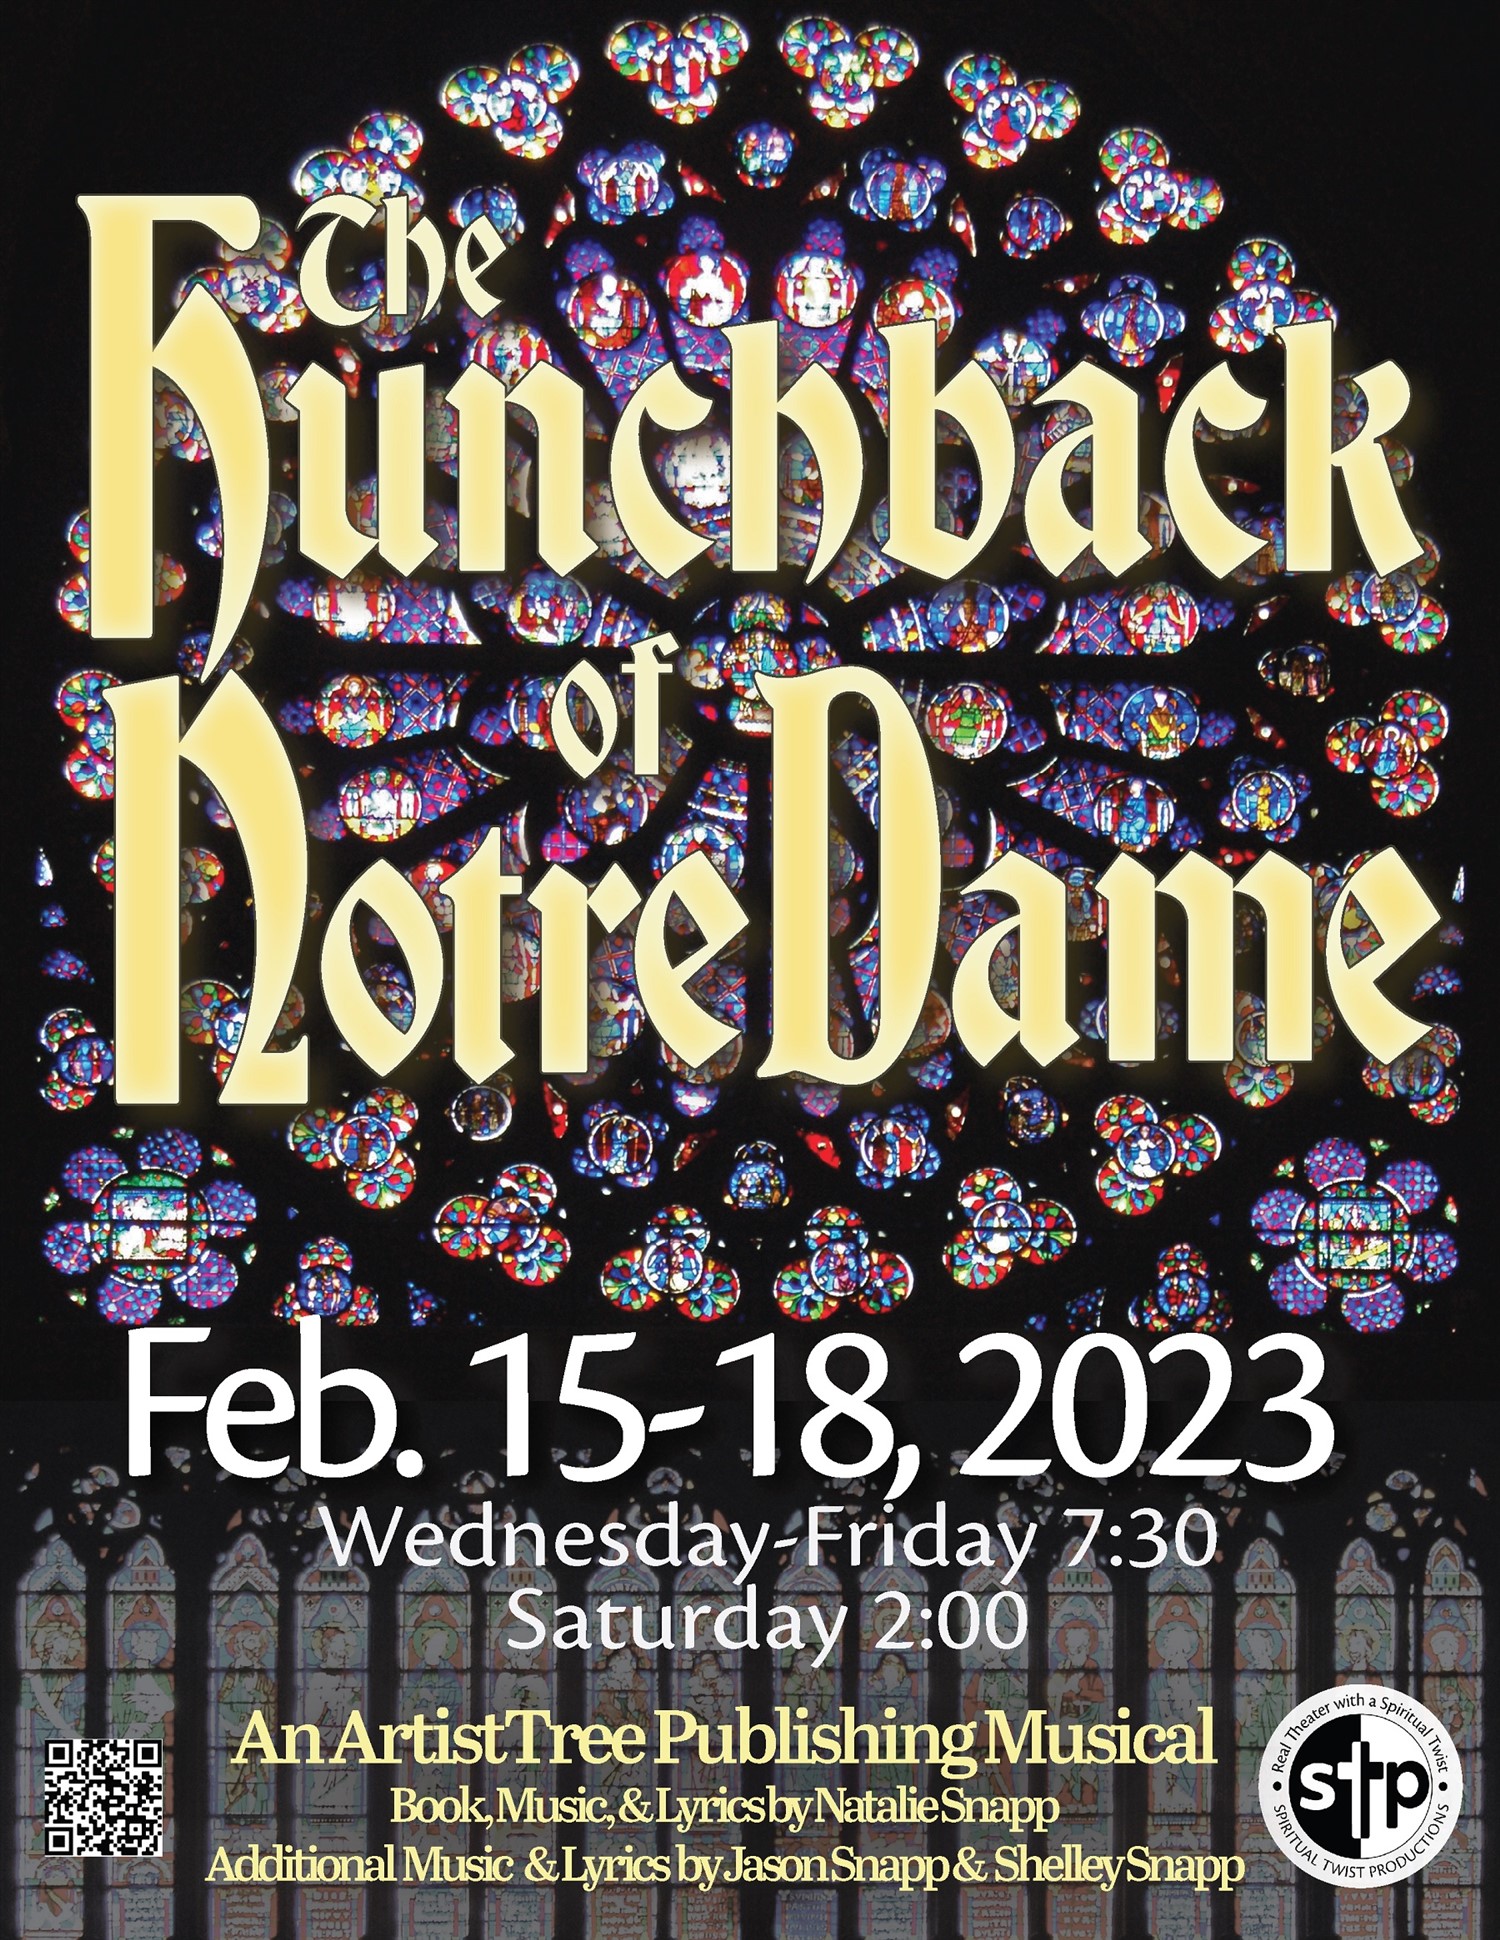 The Hunchback of Notre Dame Saturday, February 18, 2023 @ 2 PM on Feb 18, 14:00@Spiritual Twist Productions - Pick a seat, Buy tickets and Get information on Spiritual Twist Productions tickets.spiritualtwist.com